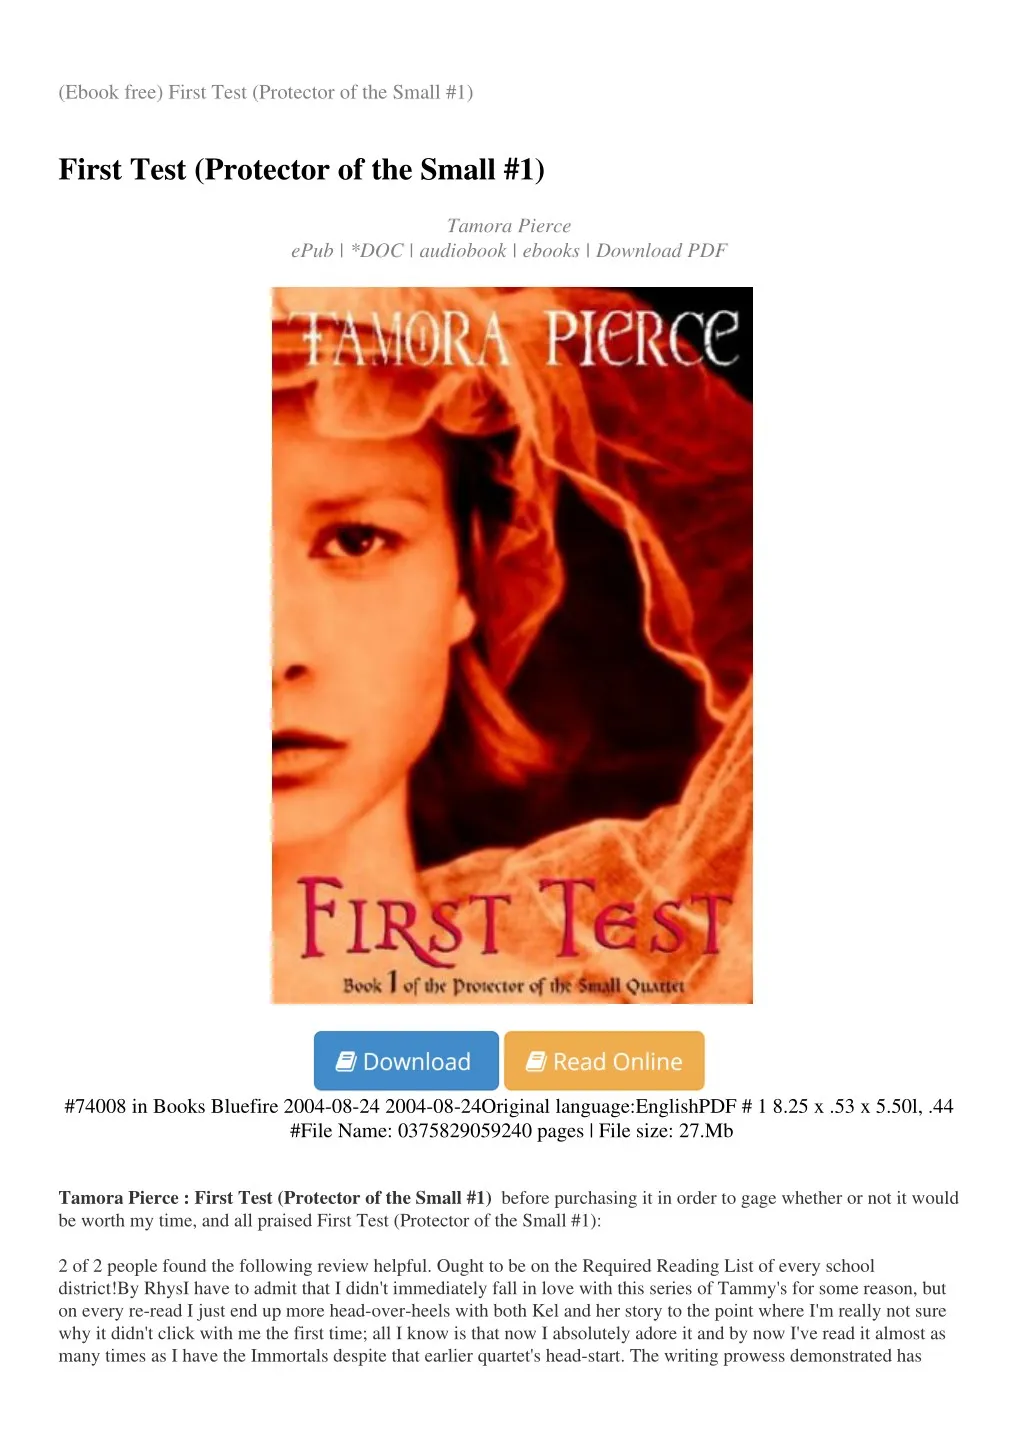 ebook free first test protector of the small 1